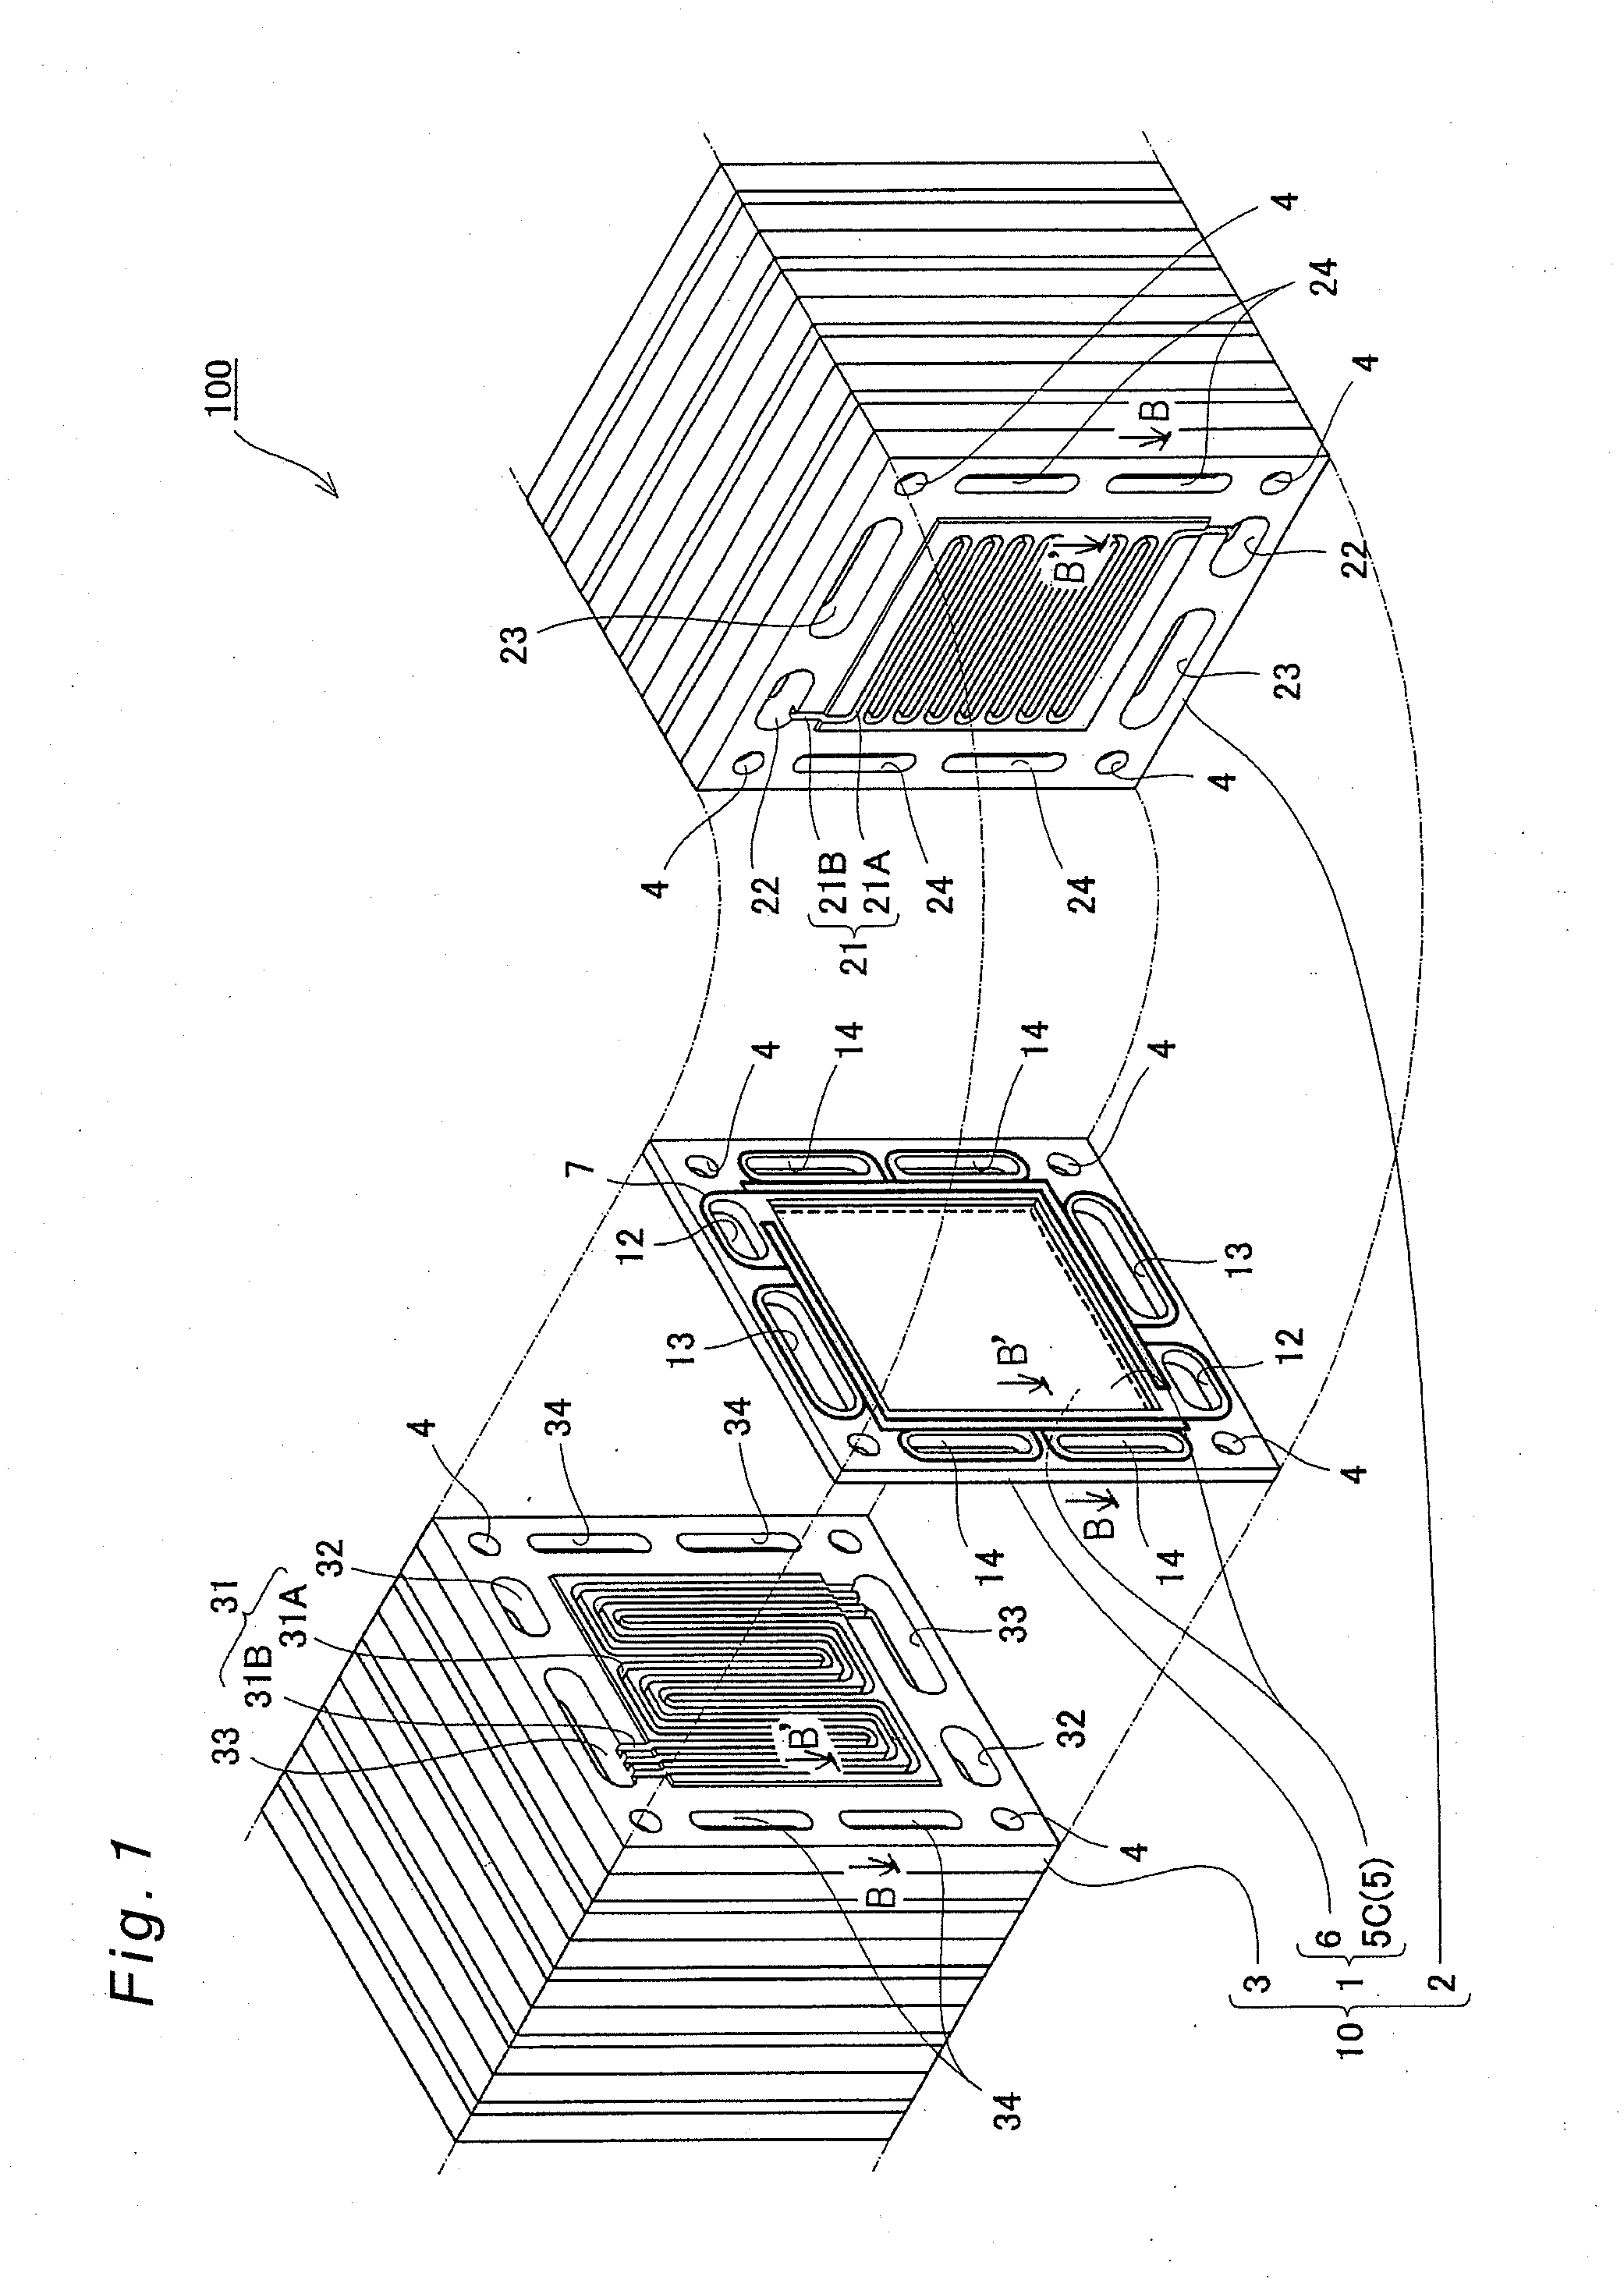 Electrode-membrane-frame assembly for fuel cell, polyelectrolyte fuel cell and manufacturing method therefor